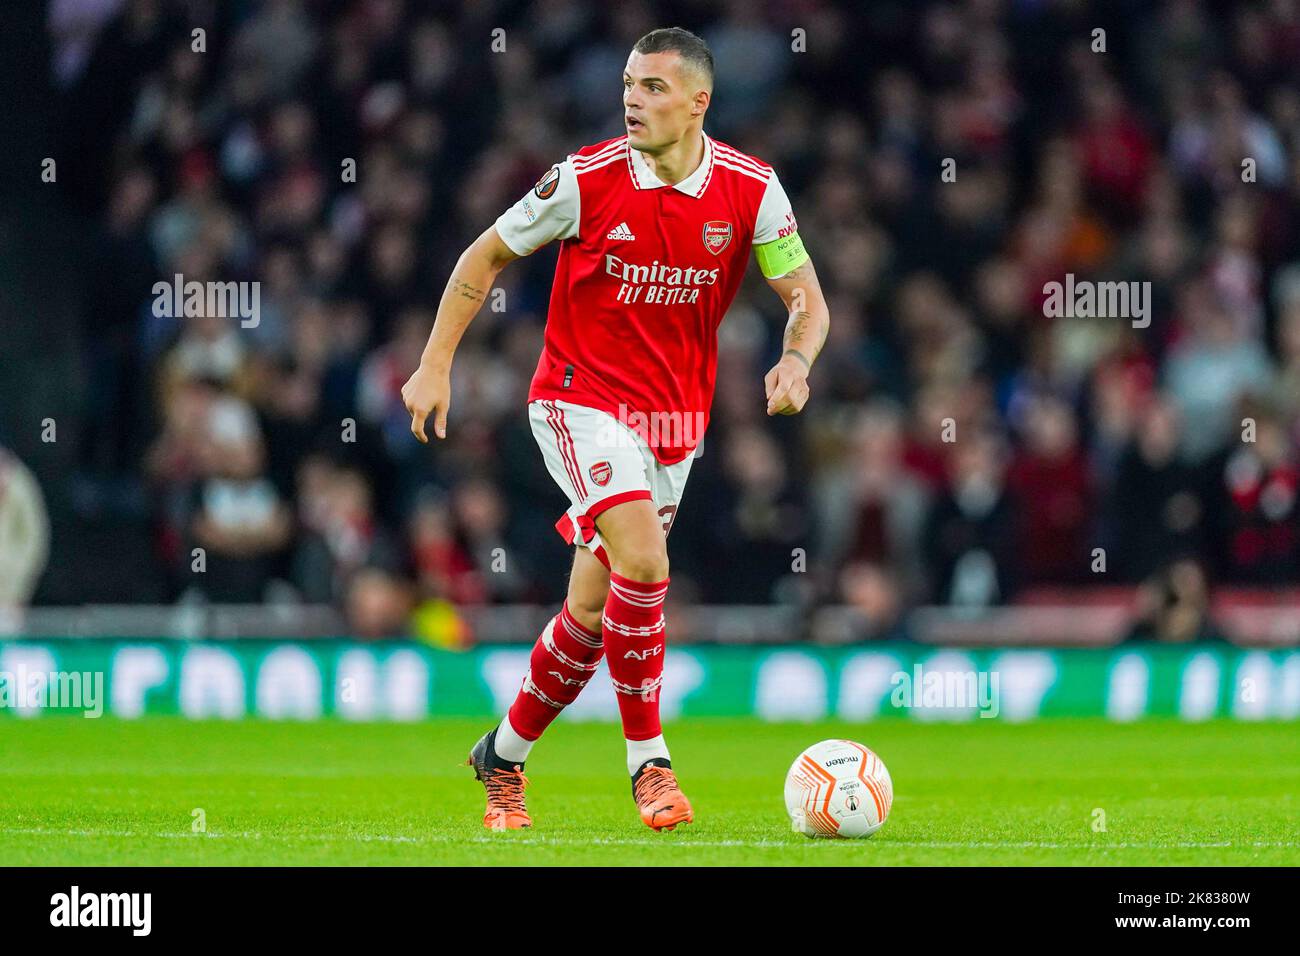 London, UK. 20th Oct, 2022. LONDON, UNITED KINGDOM - OCTOBER 20: Granit Xhaka (c) of Arsenal FC during the UEFA Europa League group A match between Arsenal FC and PSV Eindhoven at Emirates Stadium on October 20, 2022 in London, United Kingdom (Photo by Joris Verwijst/Orange Pictures) Credit: Orange Pics BV/Alamy Live News Stock Photo